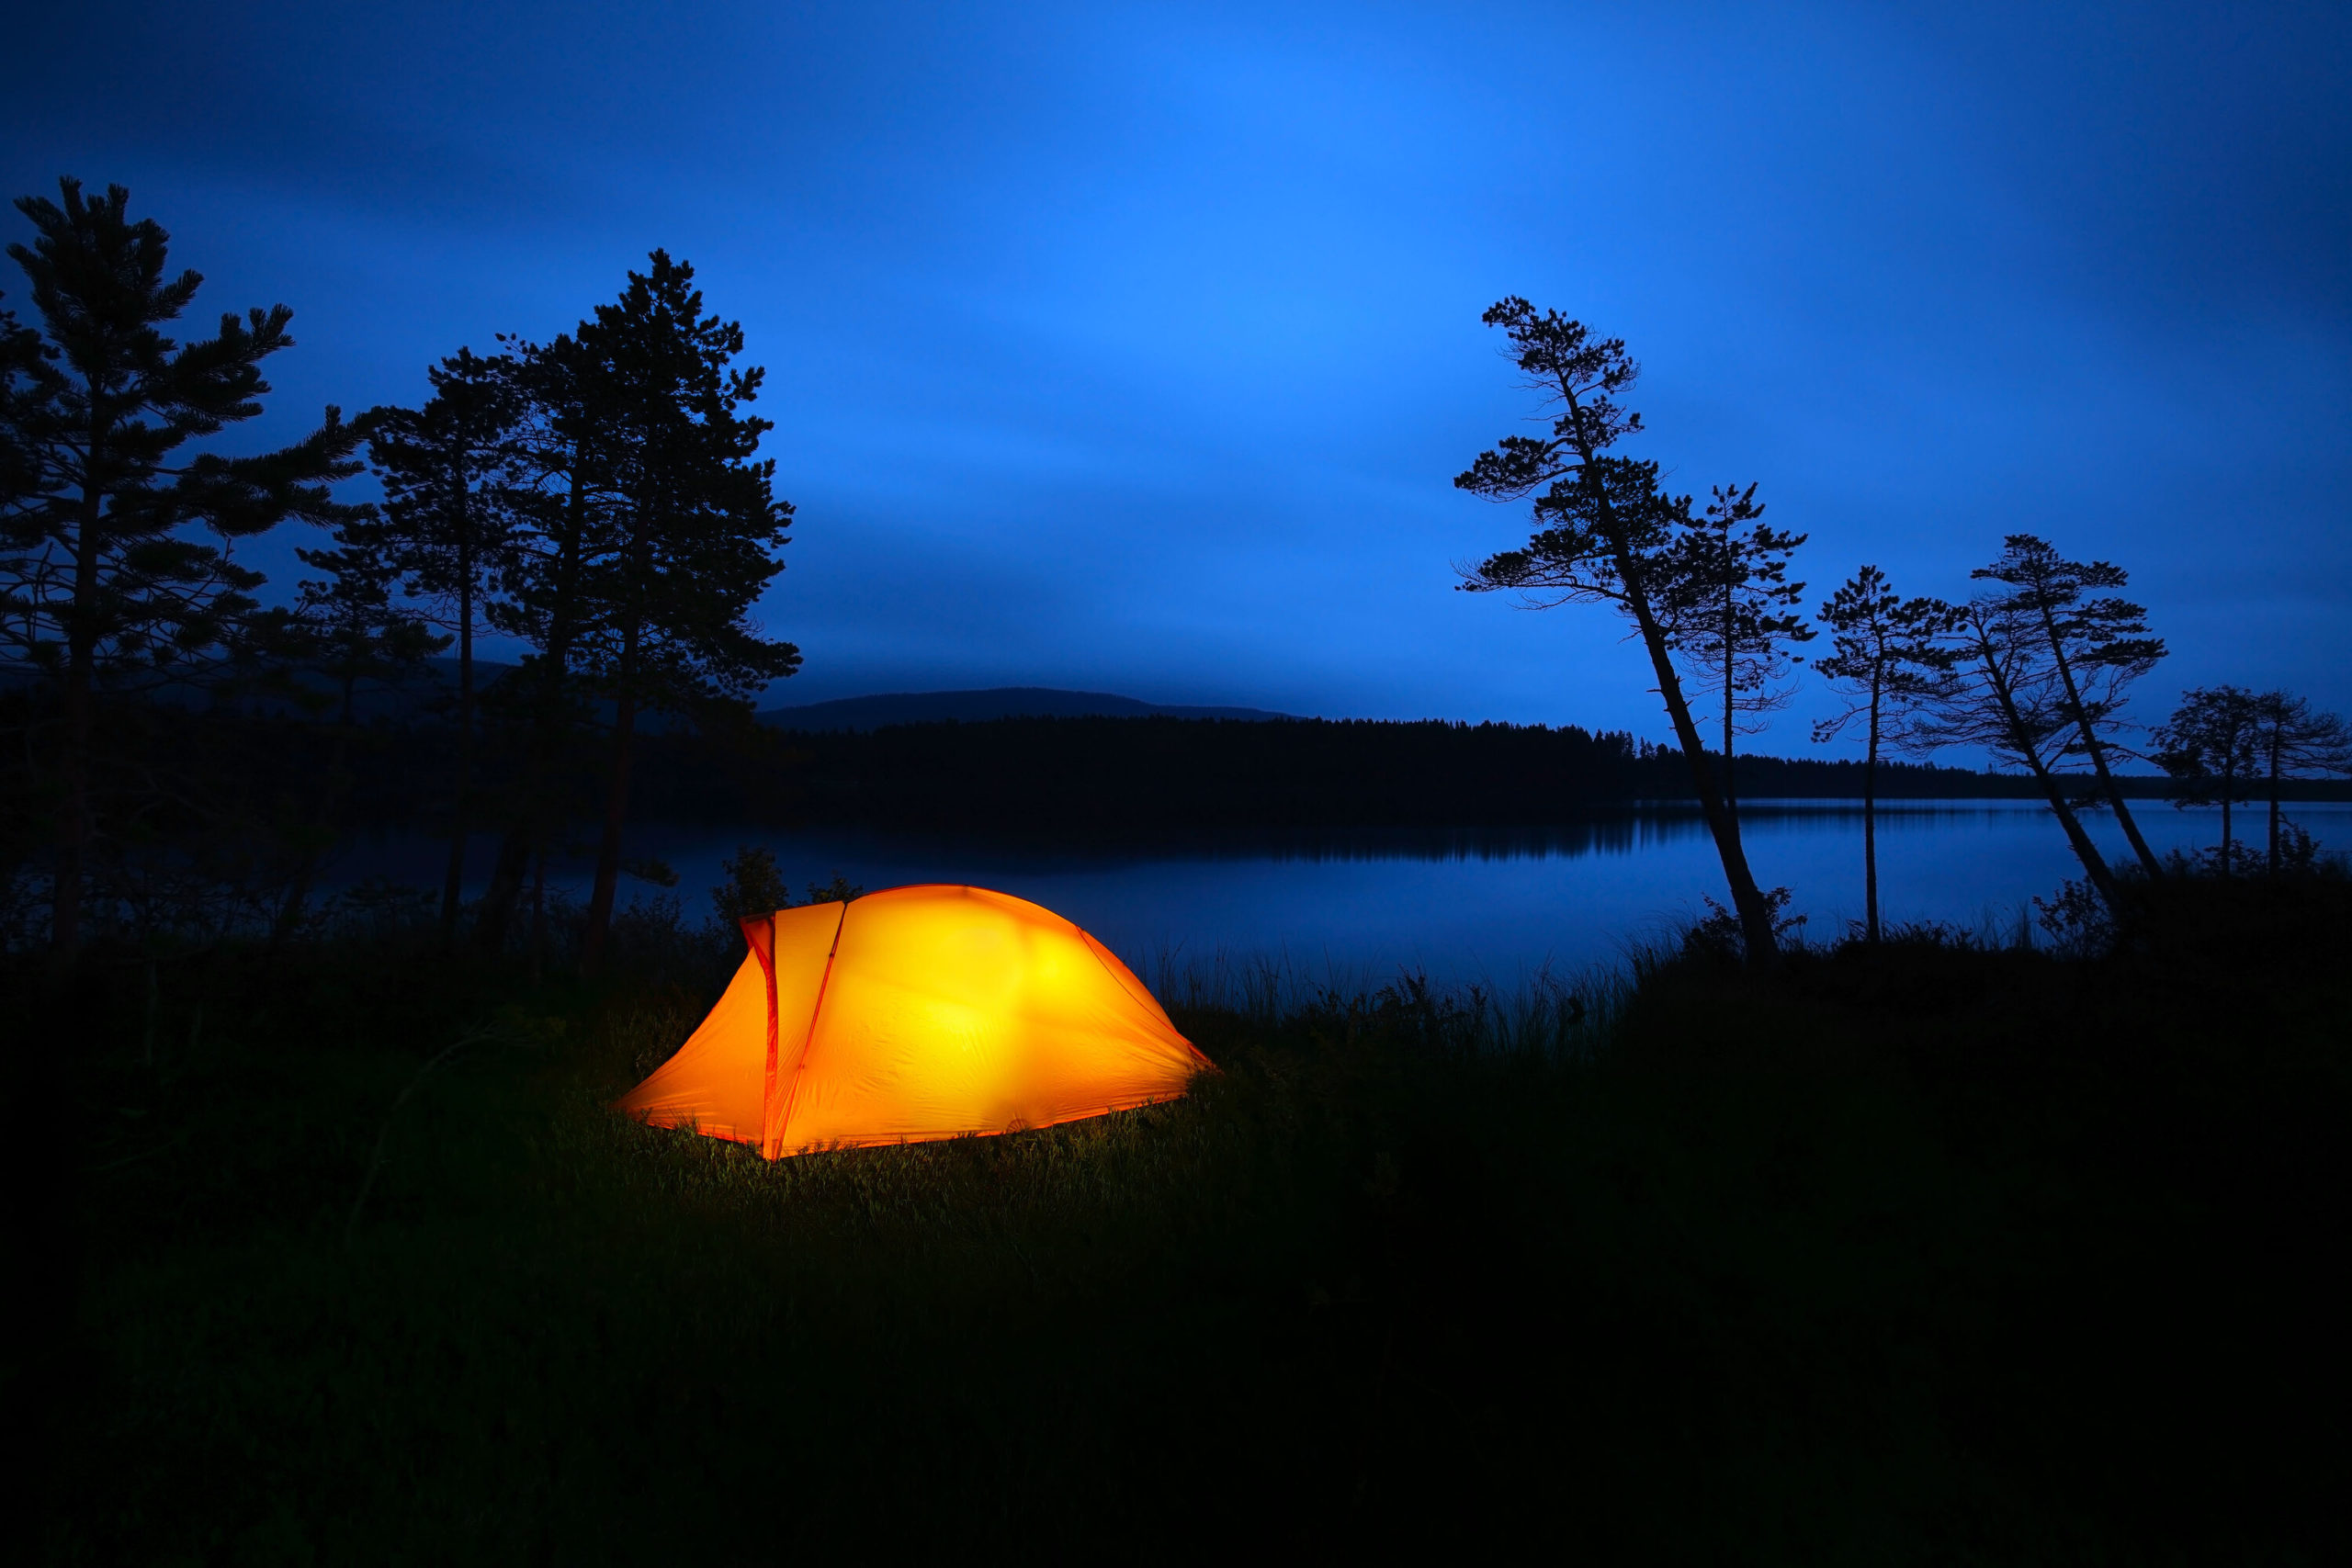 camping rules at provincial parks change scaled